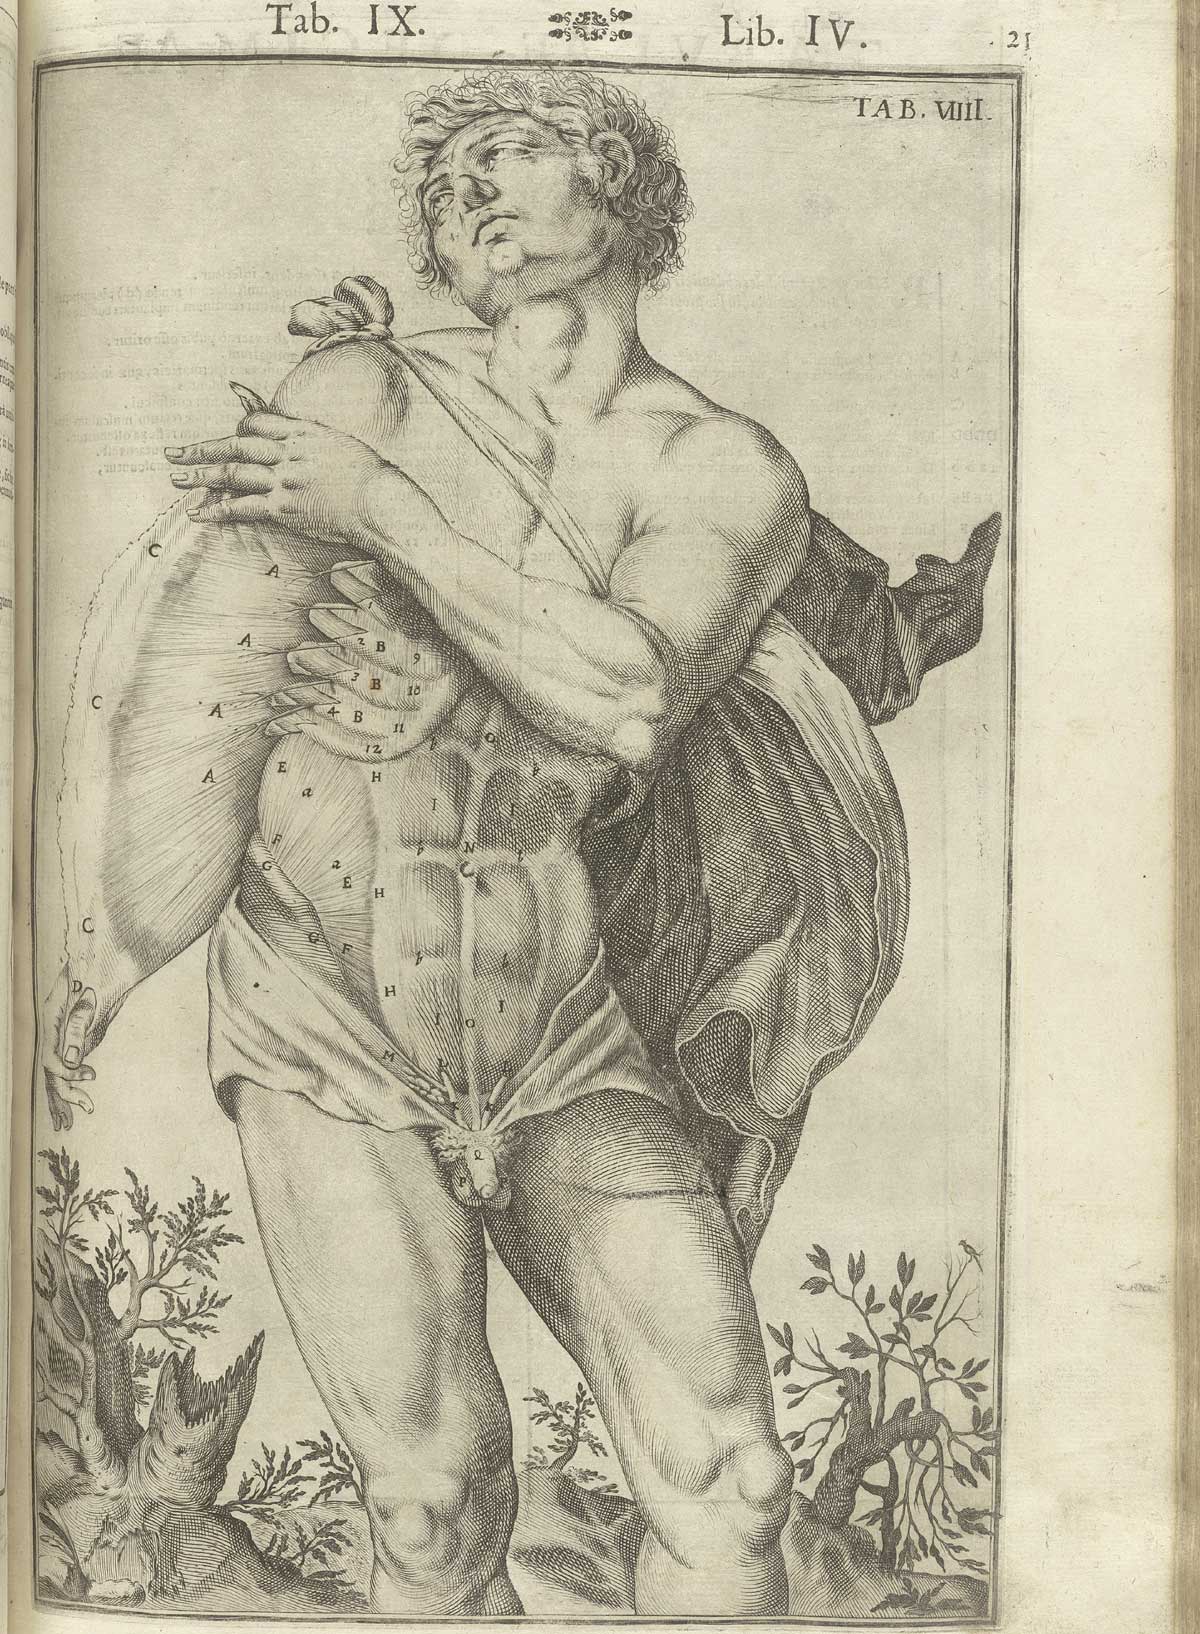 Engraving showing a nude male anatomical figure wearing a cape in a pastoral setting facing forward and to the left with flayed abdomen revealing musculature beneath; the figure’s right and left hands pulling open the fascia from his chest in a provocative fashion; from Adriaan van de Spiegel and Giulio Cassieri’s De humani corporis fabrica libri decem, Venice, 1627, NLM call no. WZ 250 S755dh 1627.